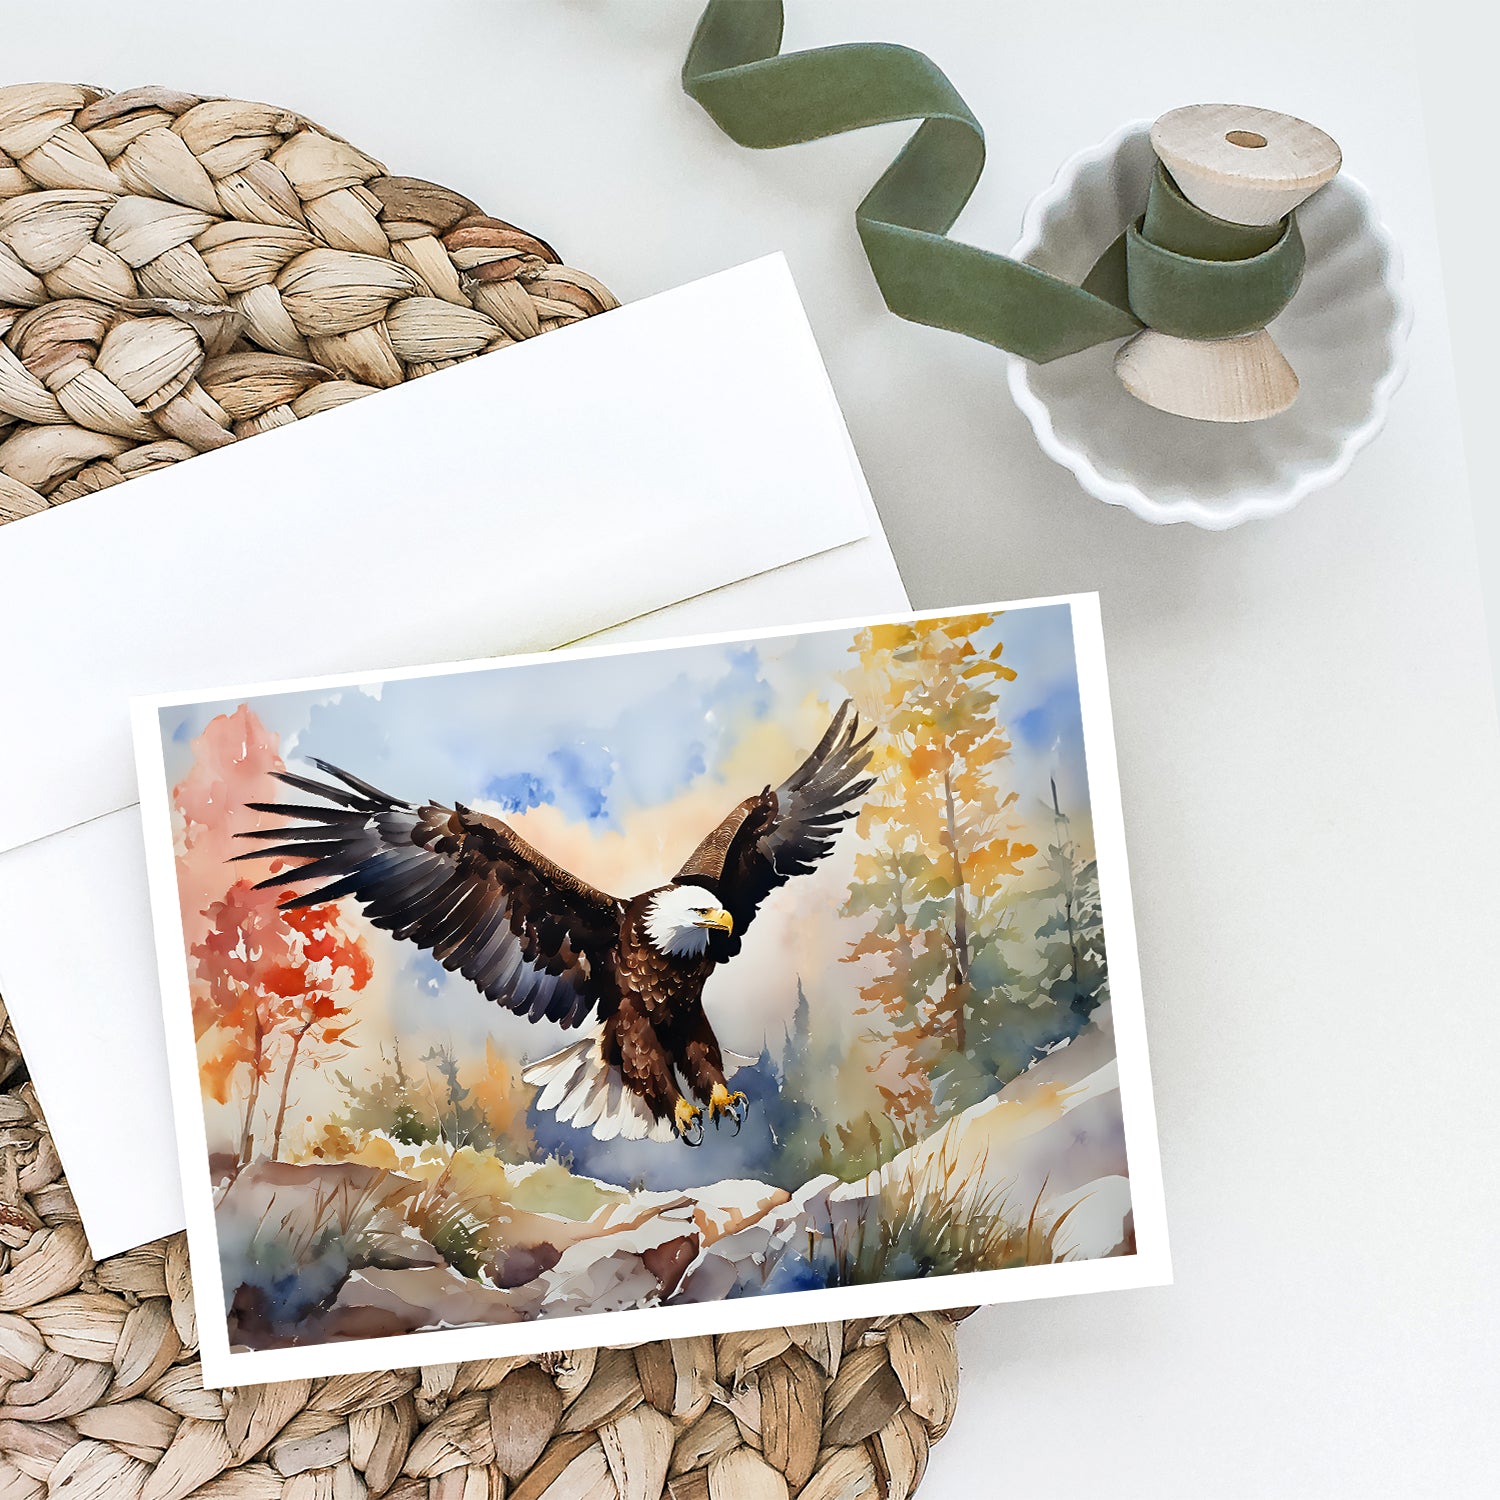 Buy this Eagle Greeting Cards Pack of 8